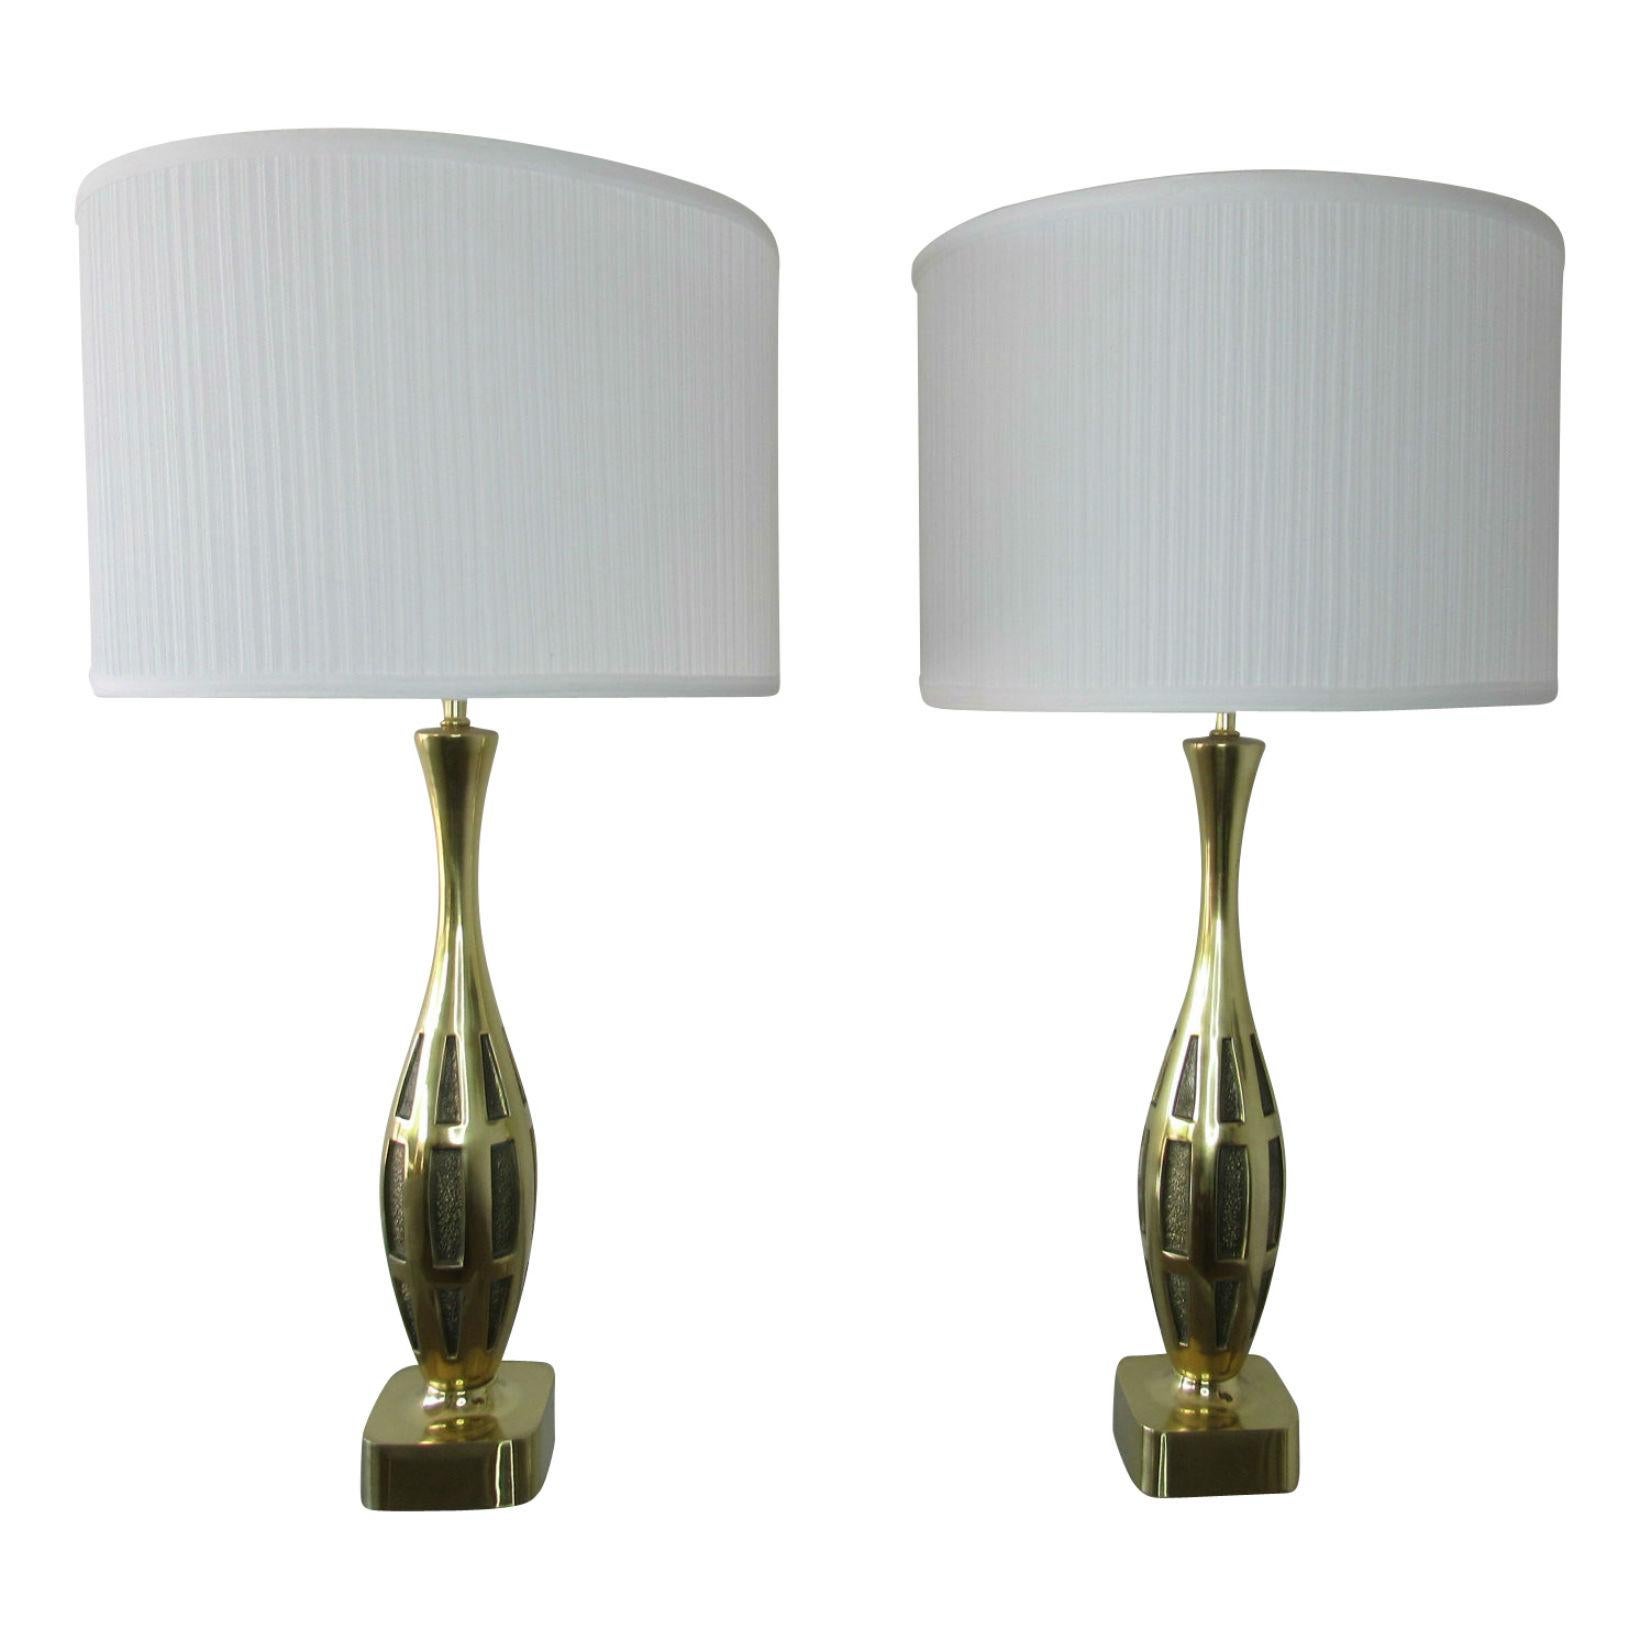 Tony Paul Midcentury Modern Brass Table Lamps For Sale 1